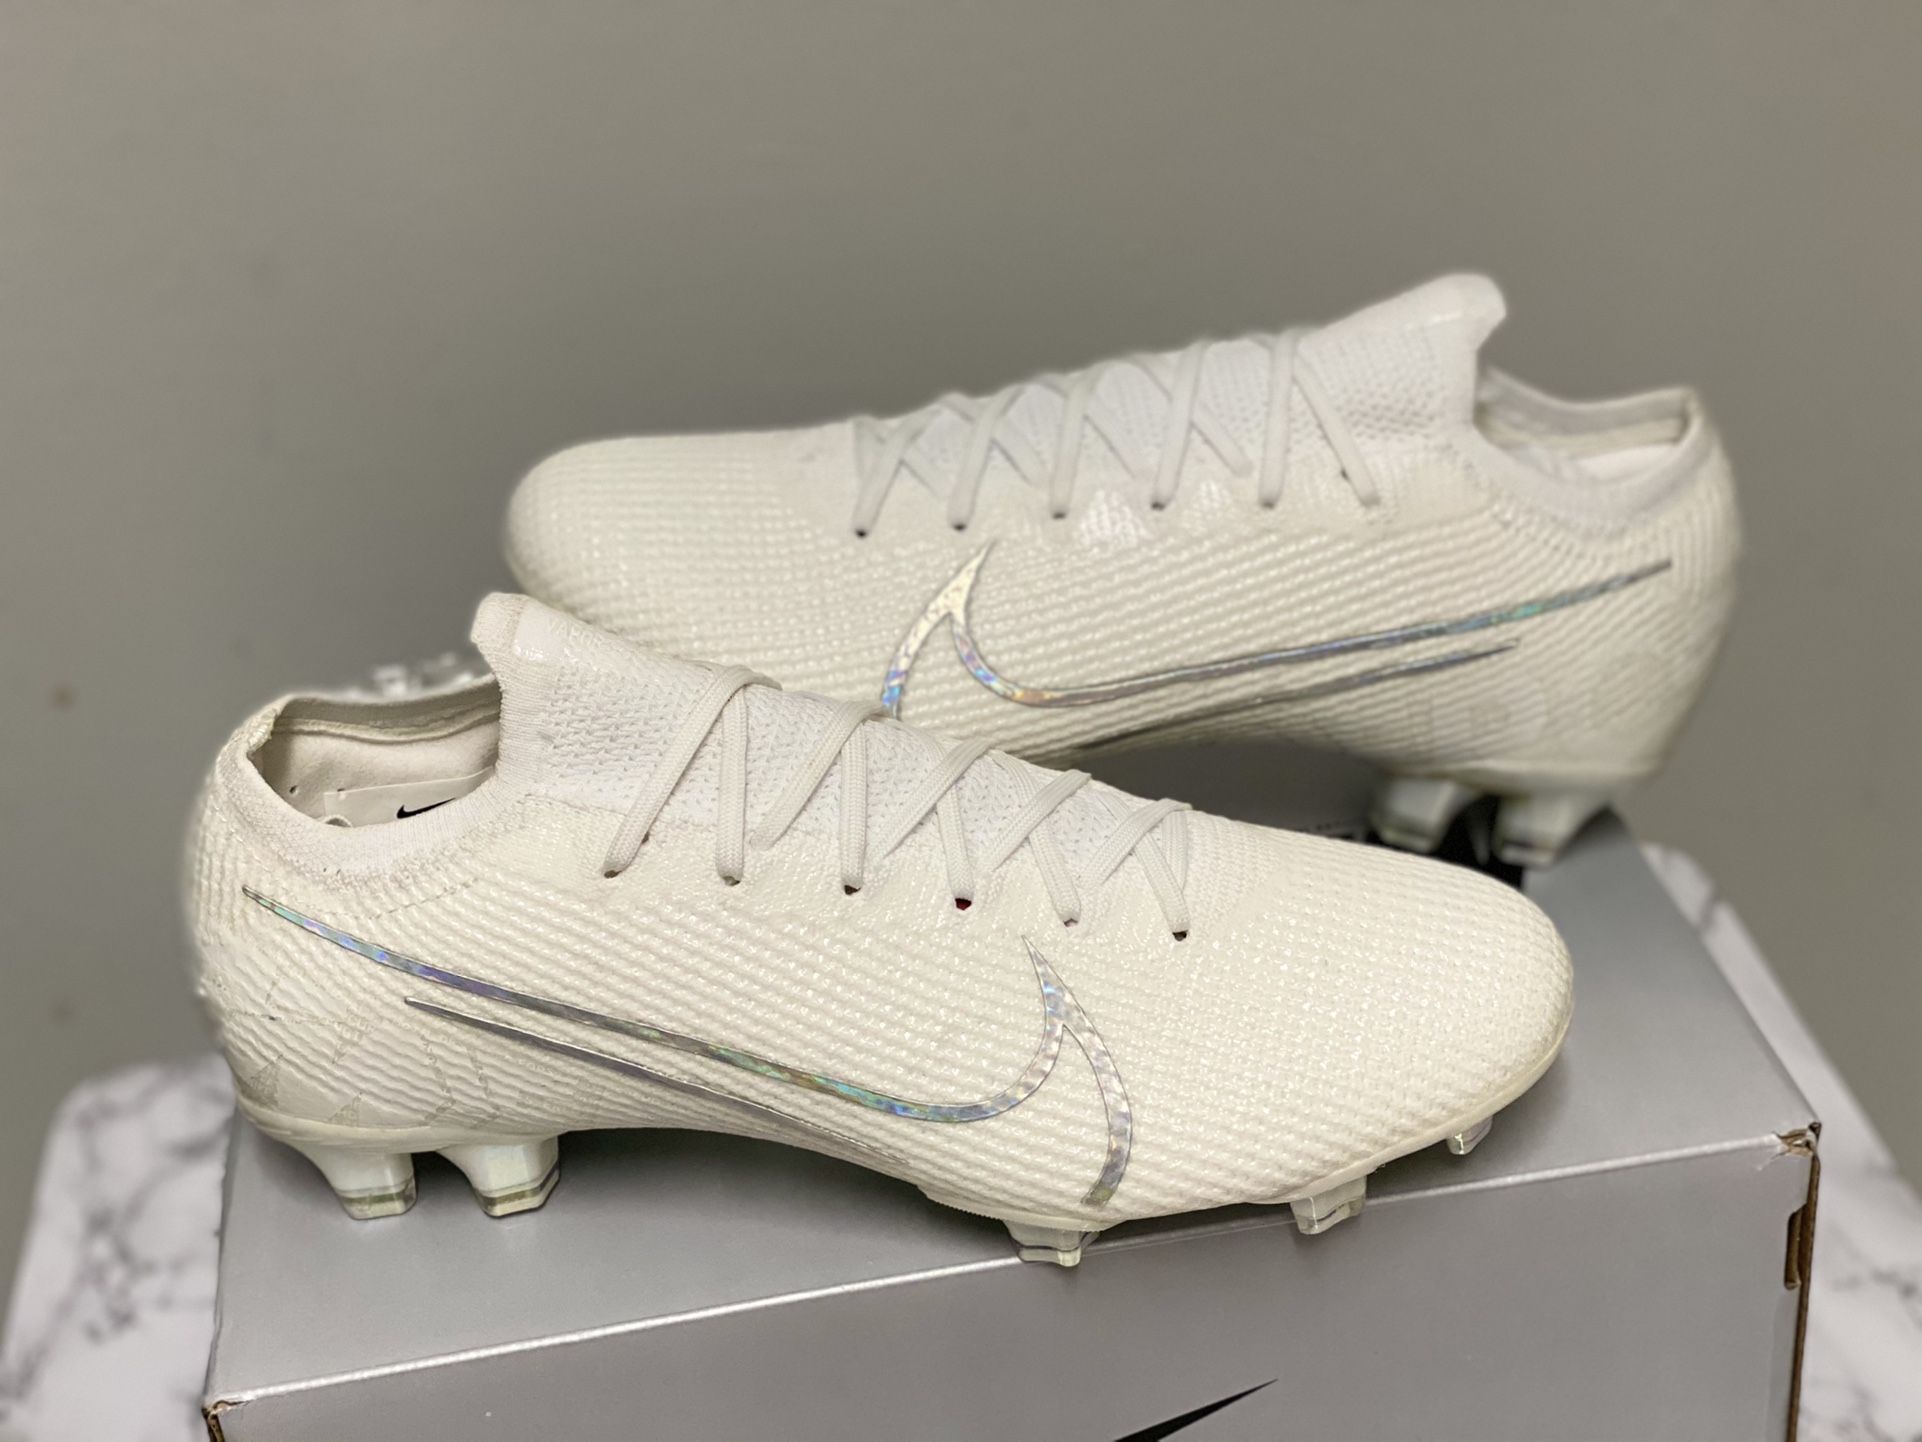 Soccer Cleats Nike Mercurial Vapor 13 FG Elite Nuovo White Soccer Cleats Size US 7.5 EUO 40.5 -25.5cm